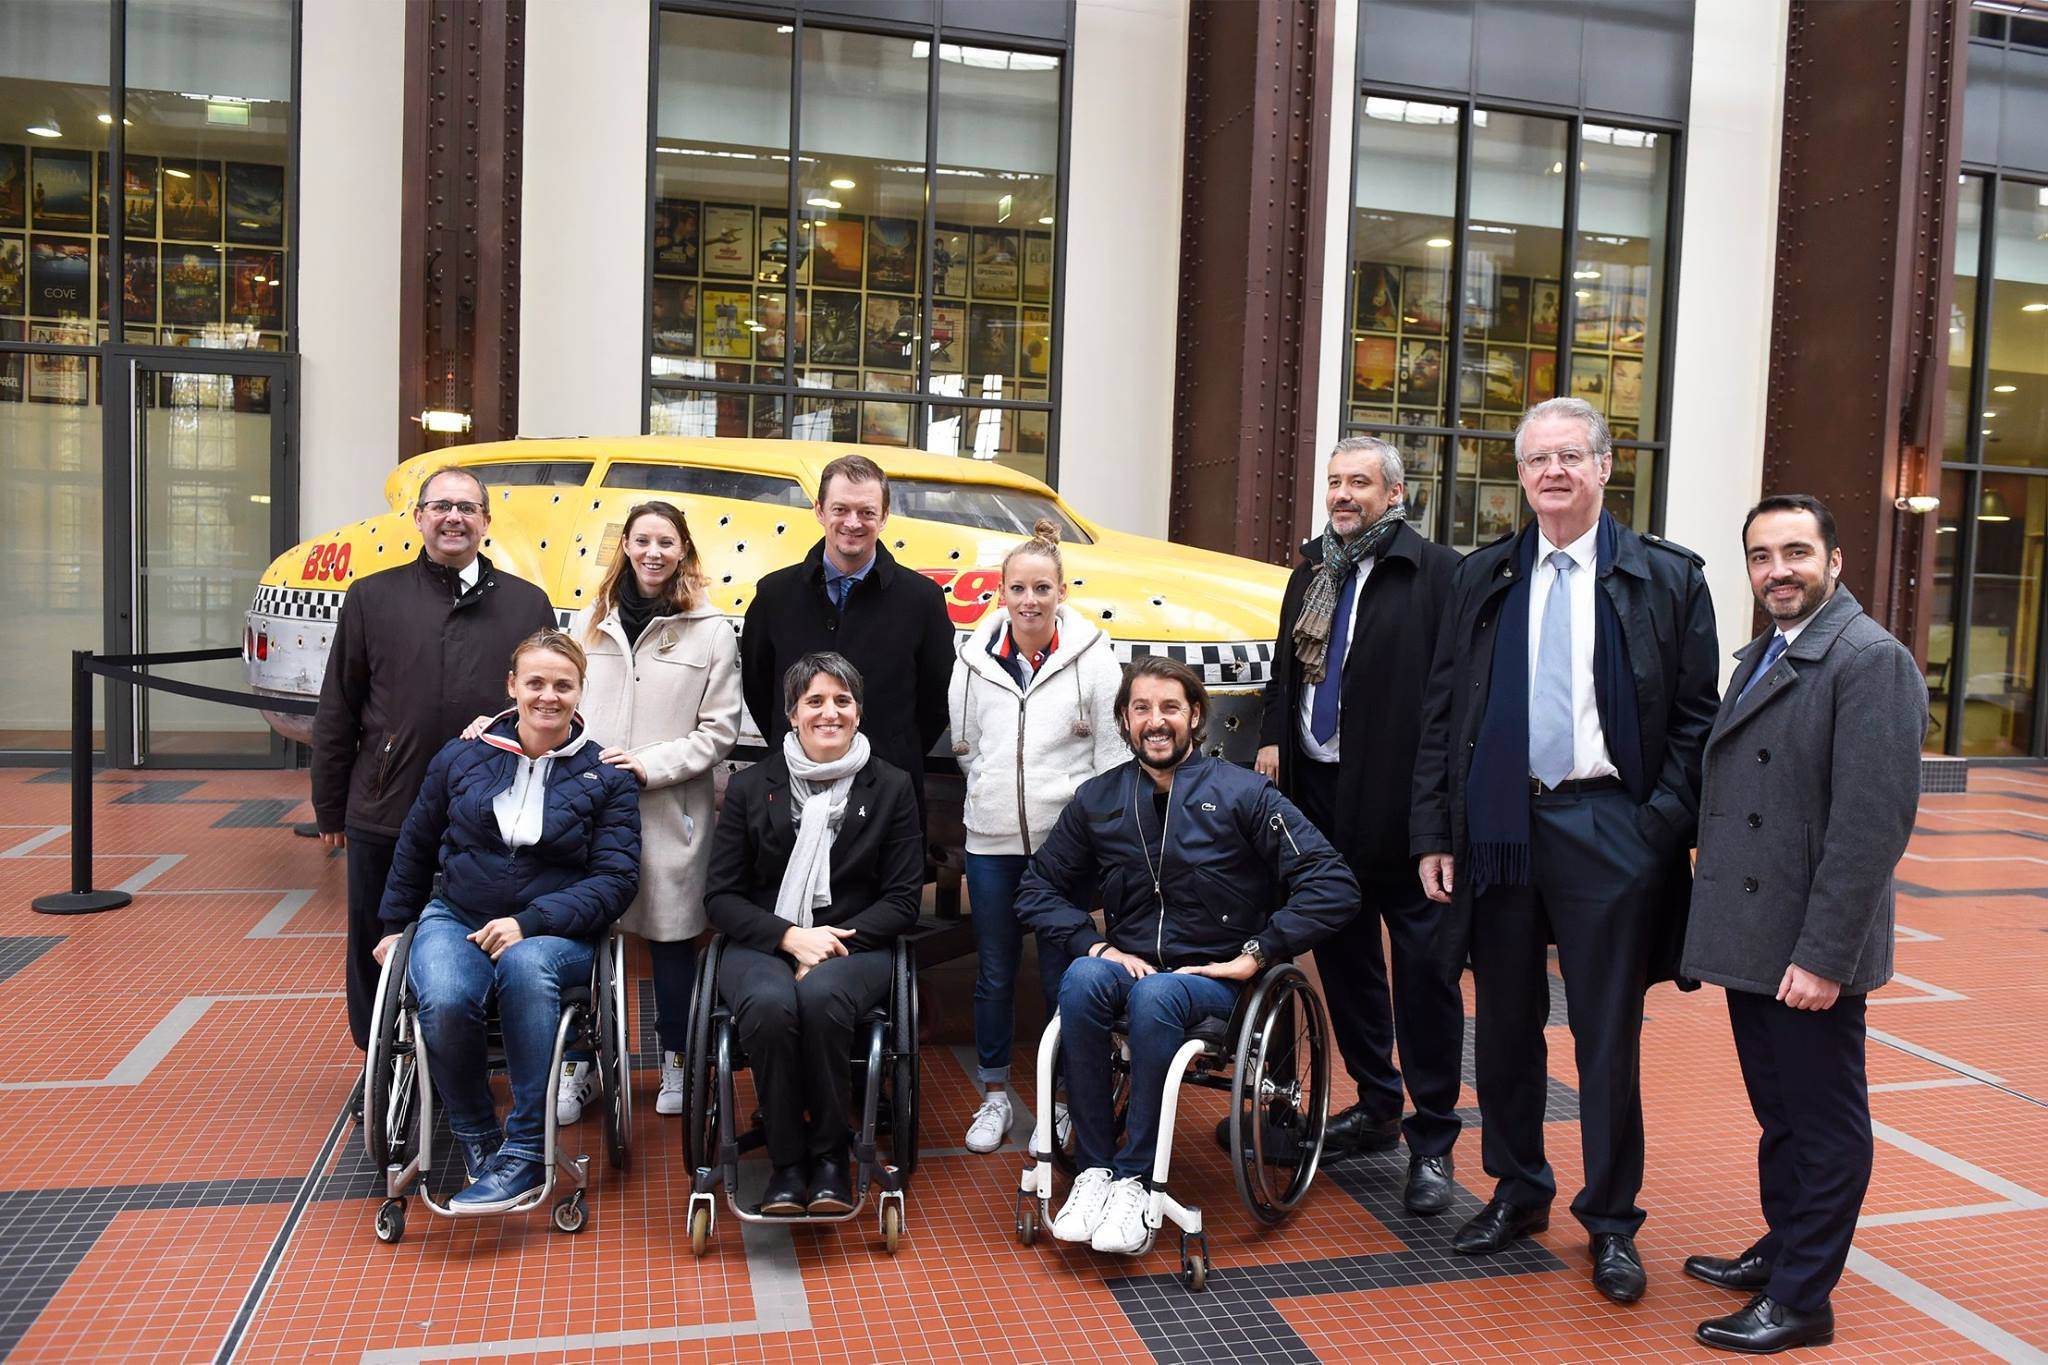 IPC President Andrew Parsons, back row, third left, at the Cité du Cinéma in Saint-Denis which will form part of the Athletes' Village and includes a prop from Luc Besson’s science fiction film The Fifth Element ©Paris 2024